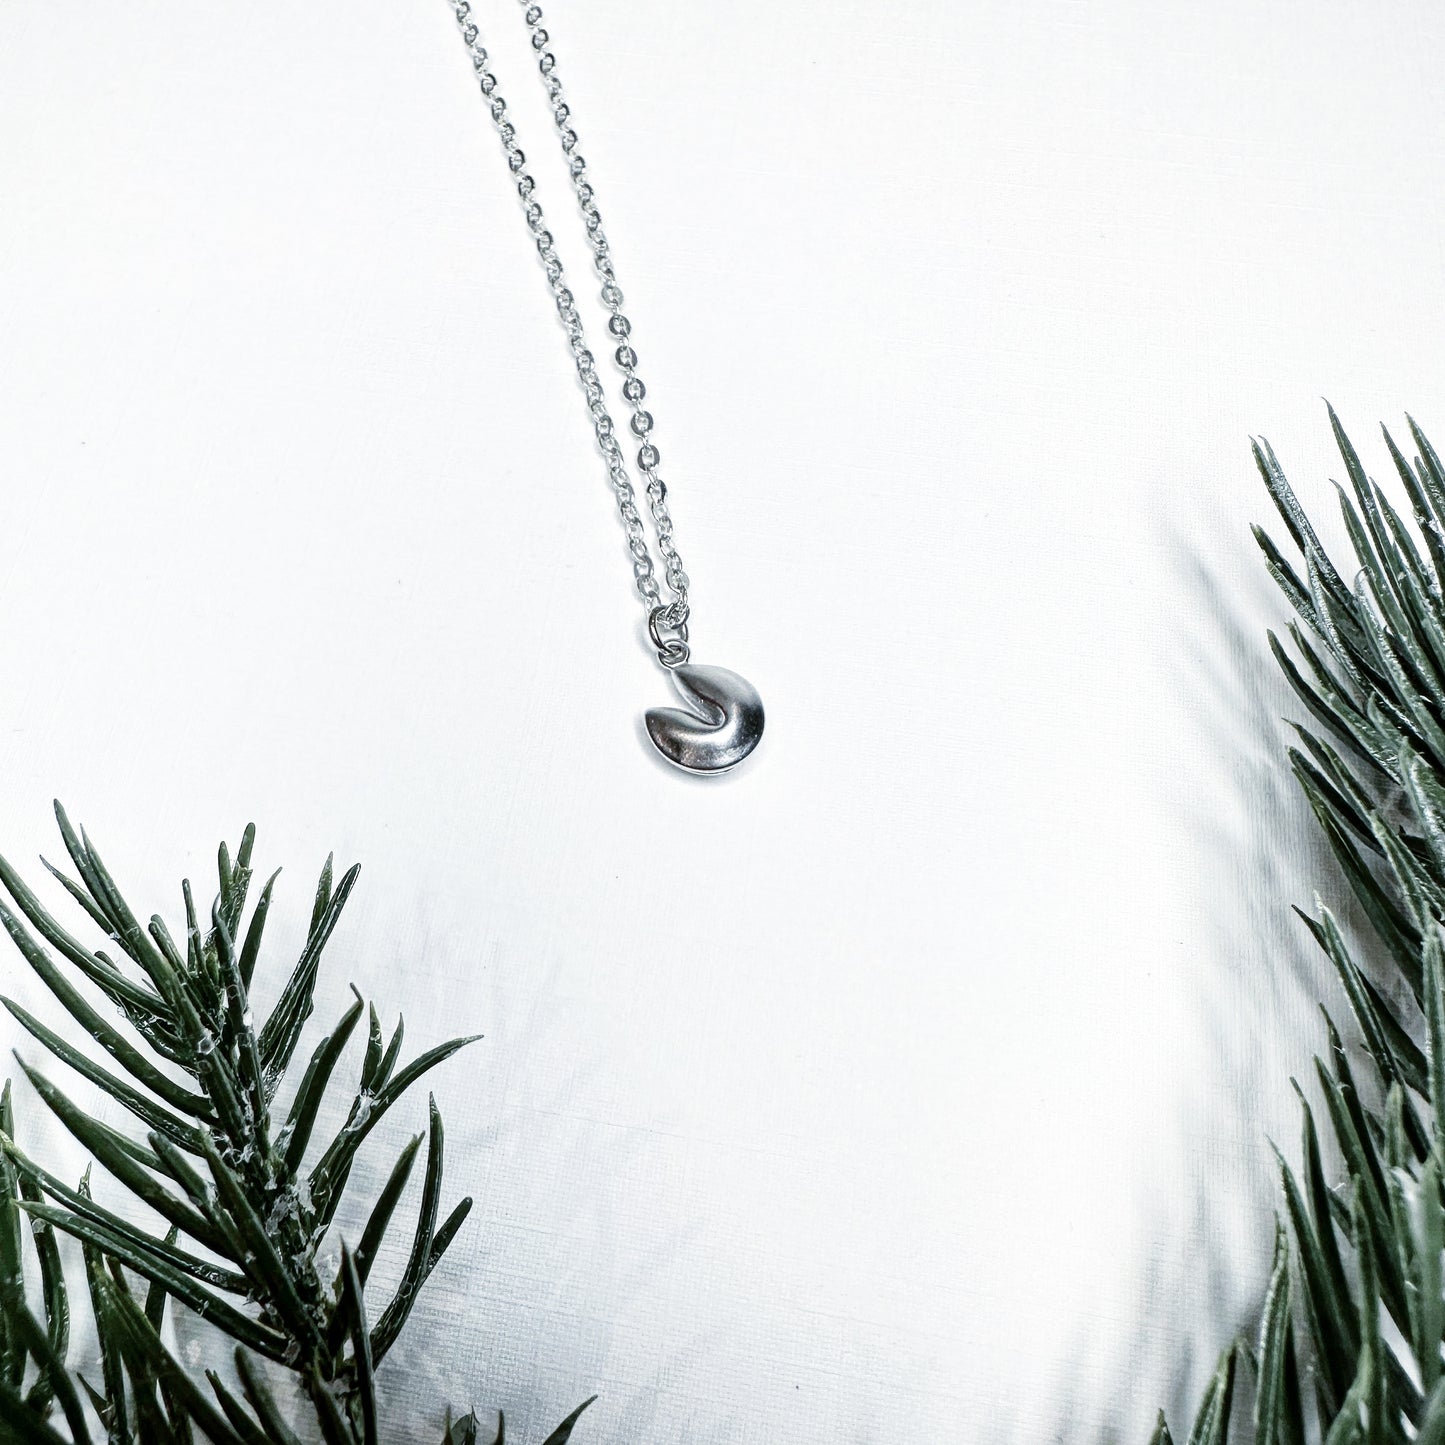 Silver Fortune Cookie Necklace